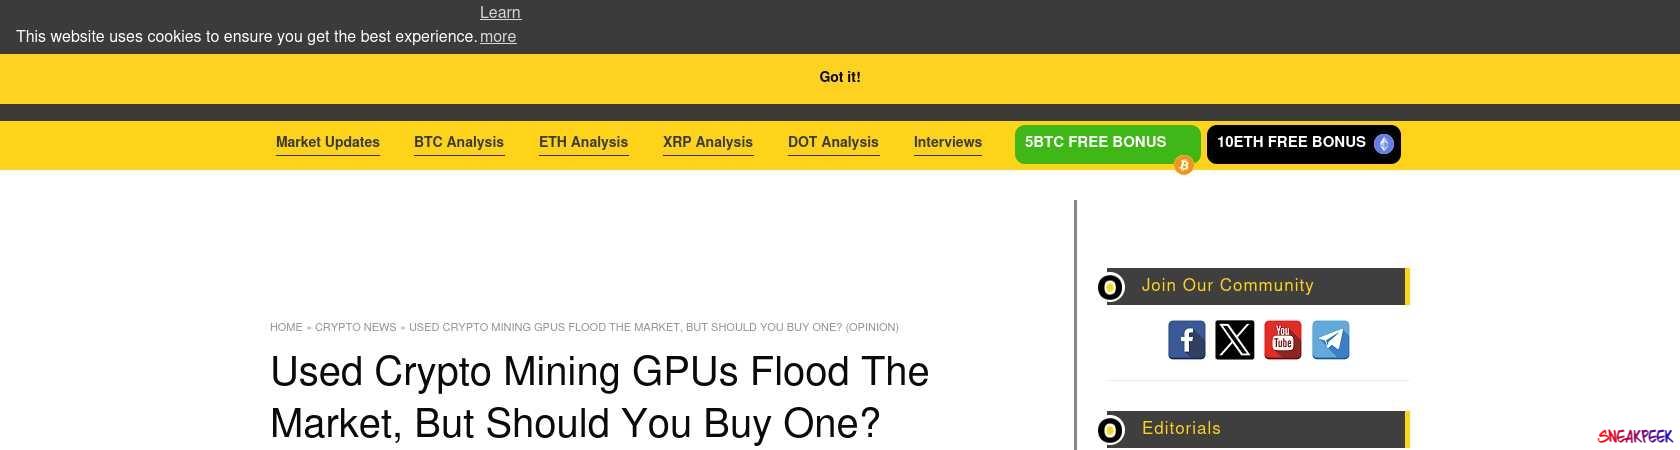 Read the full Article:  ⭲ Used Crypto Mining GPUs Flood The Market, But Should You Buy One? (Opinion)